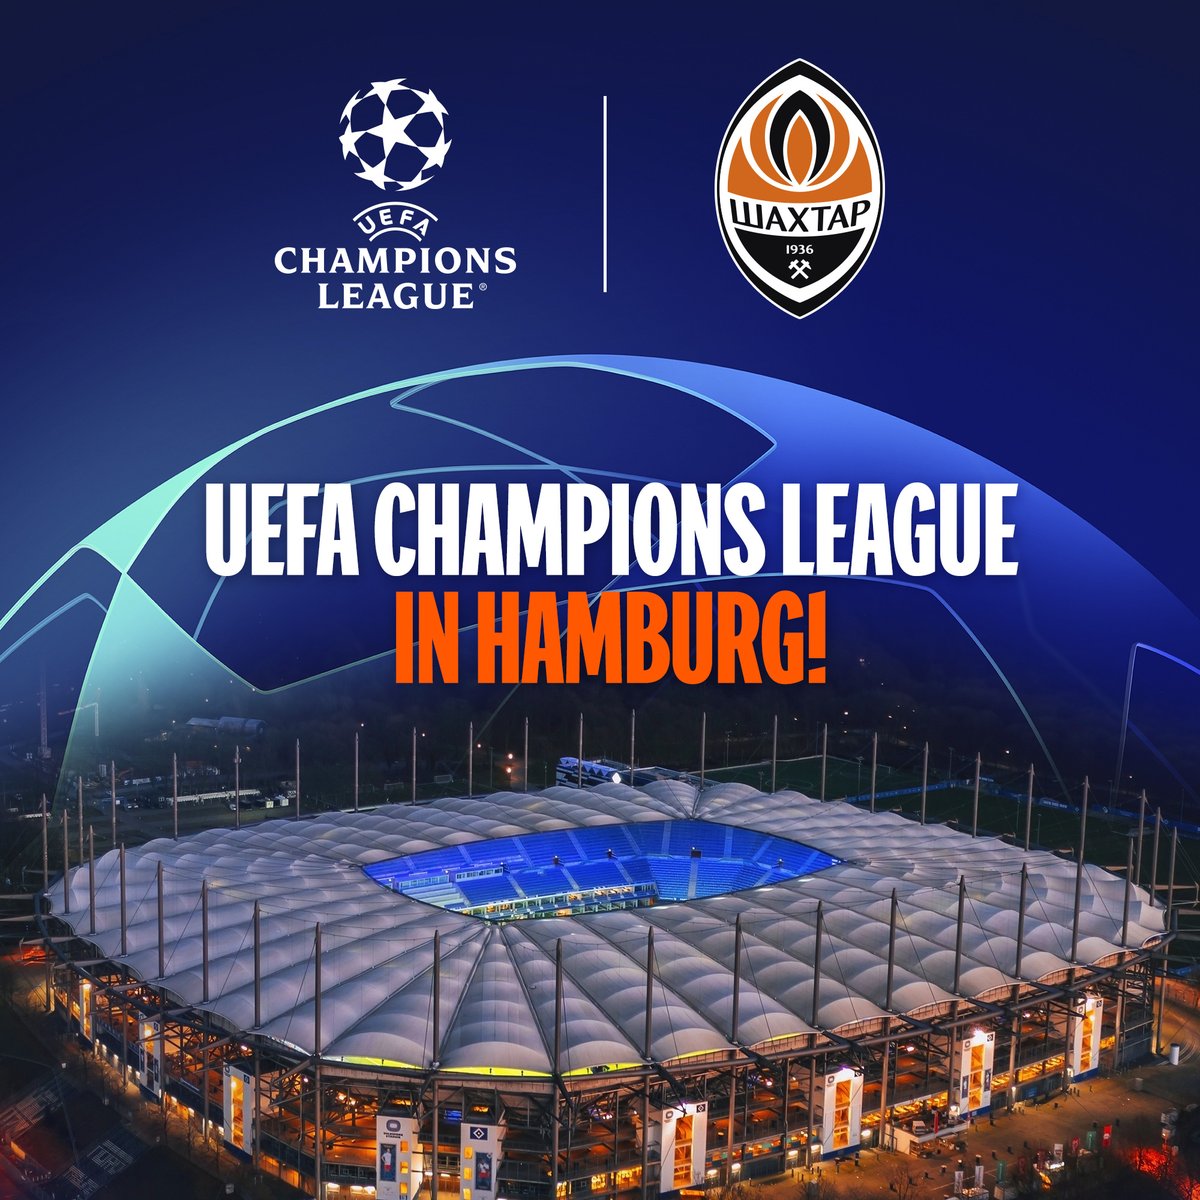 From FC SHAKHTAR ENGLISH (@FCShakhtar_eng)